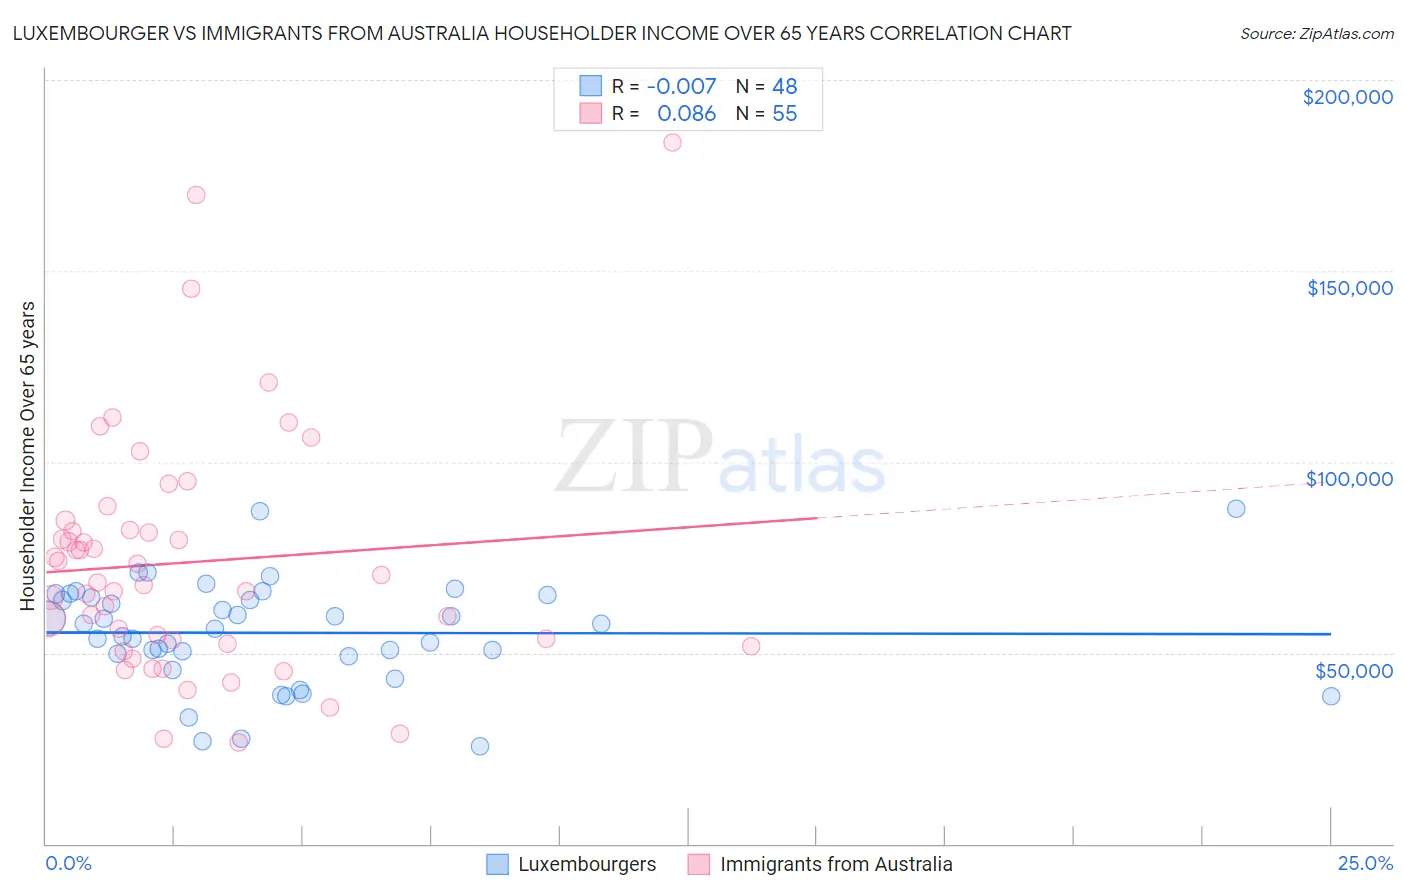 Luxembourger vs Immigrants from Australia Householder Income Over 65 years